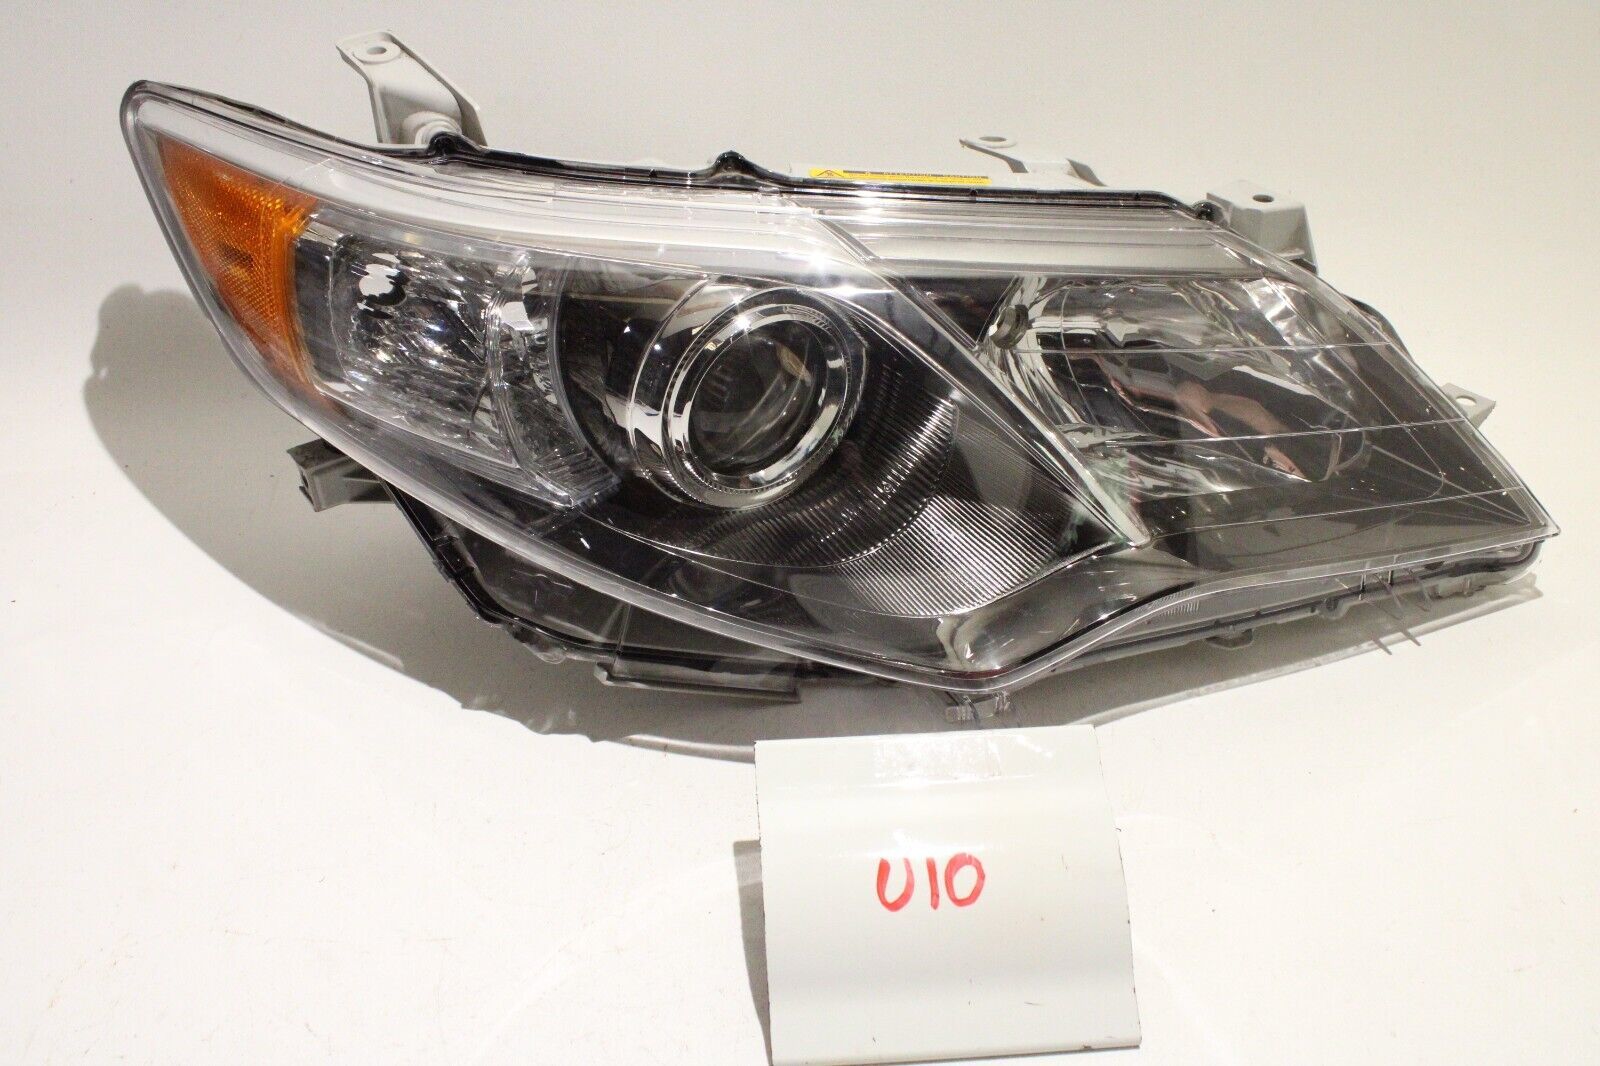 Primary image for New OEM Headlight Head Light Lamp Toyota Camry Xenon 2012-2014 SE EXPORT RH chip